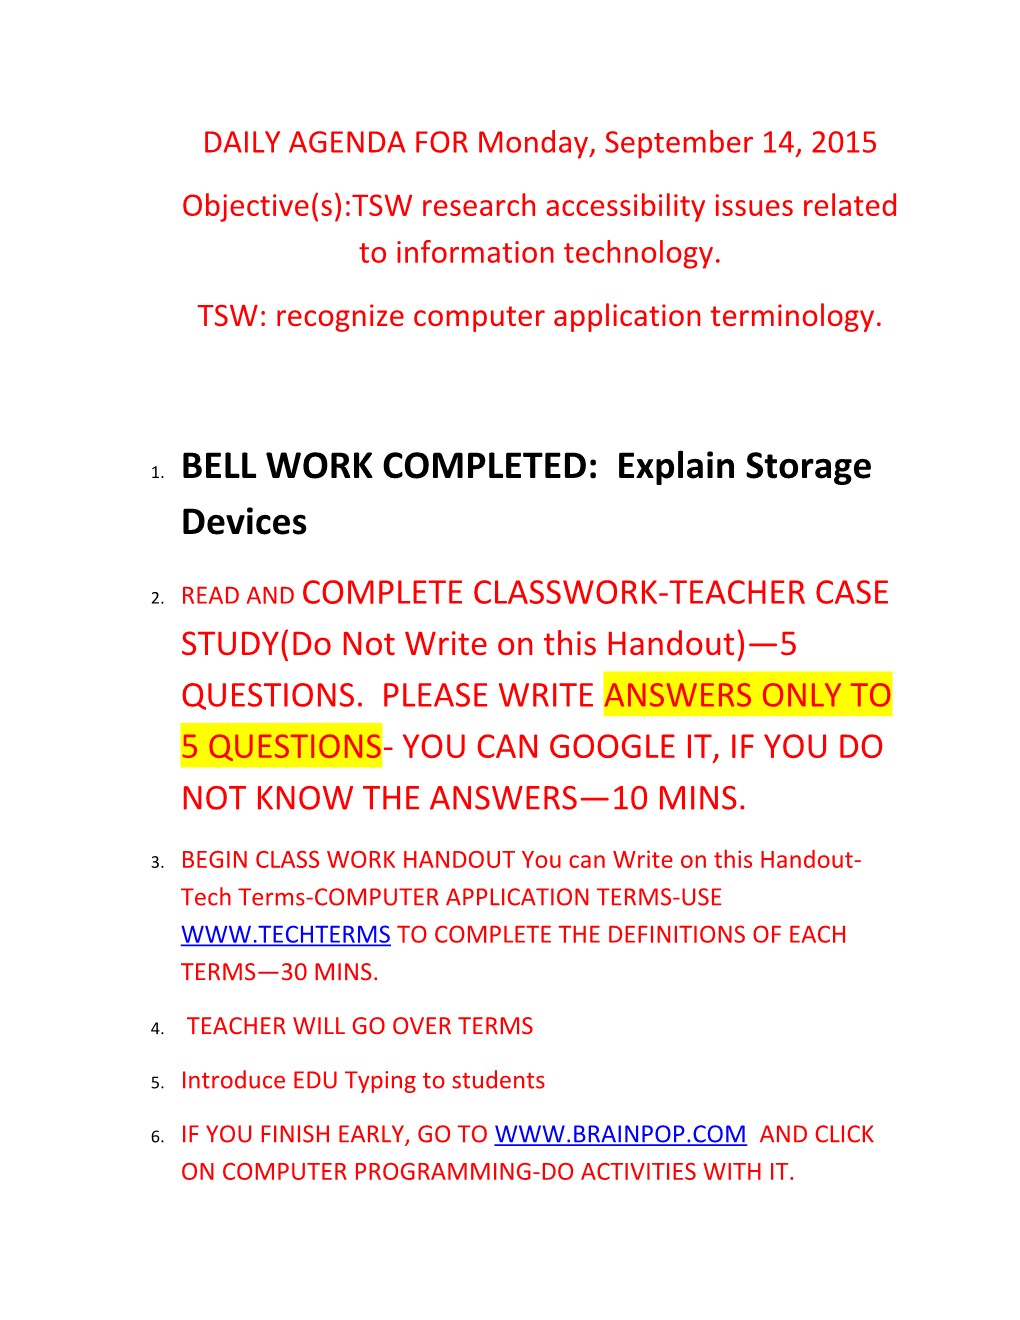 Objective(S):TSW Research Accessibility Issues Related to Information Technology